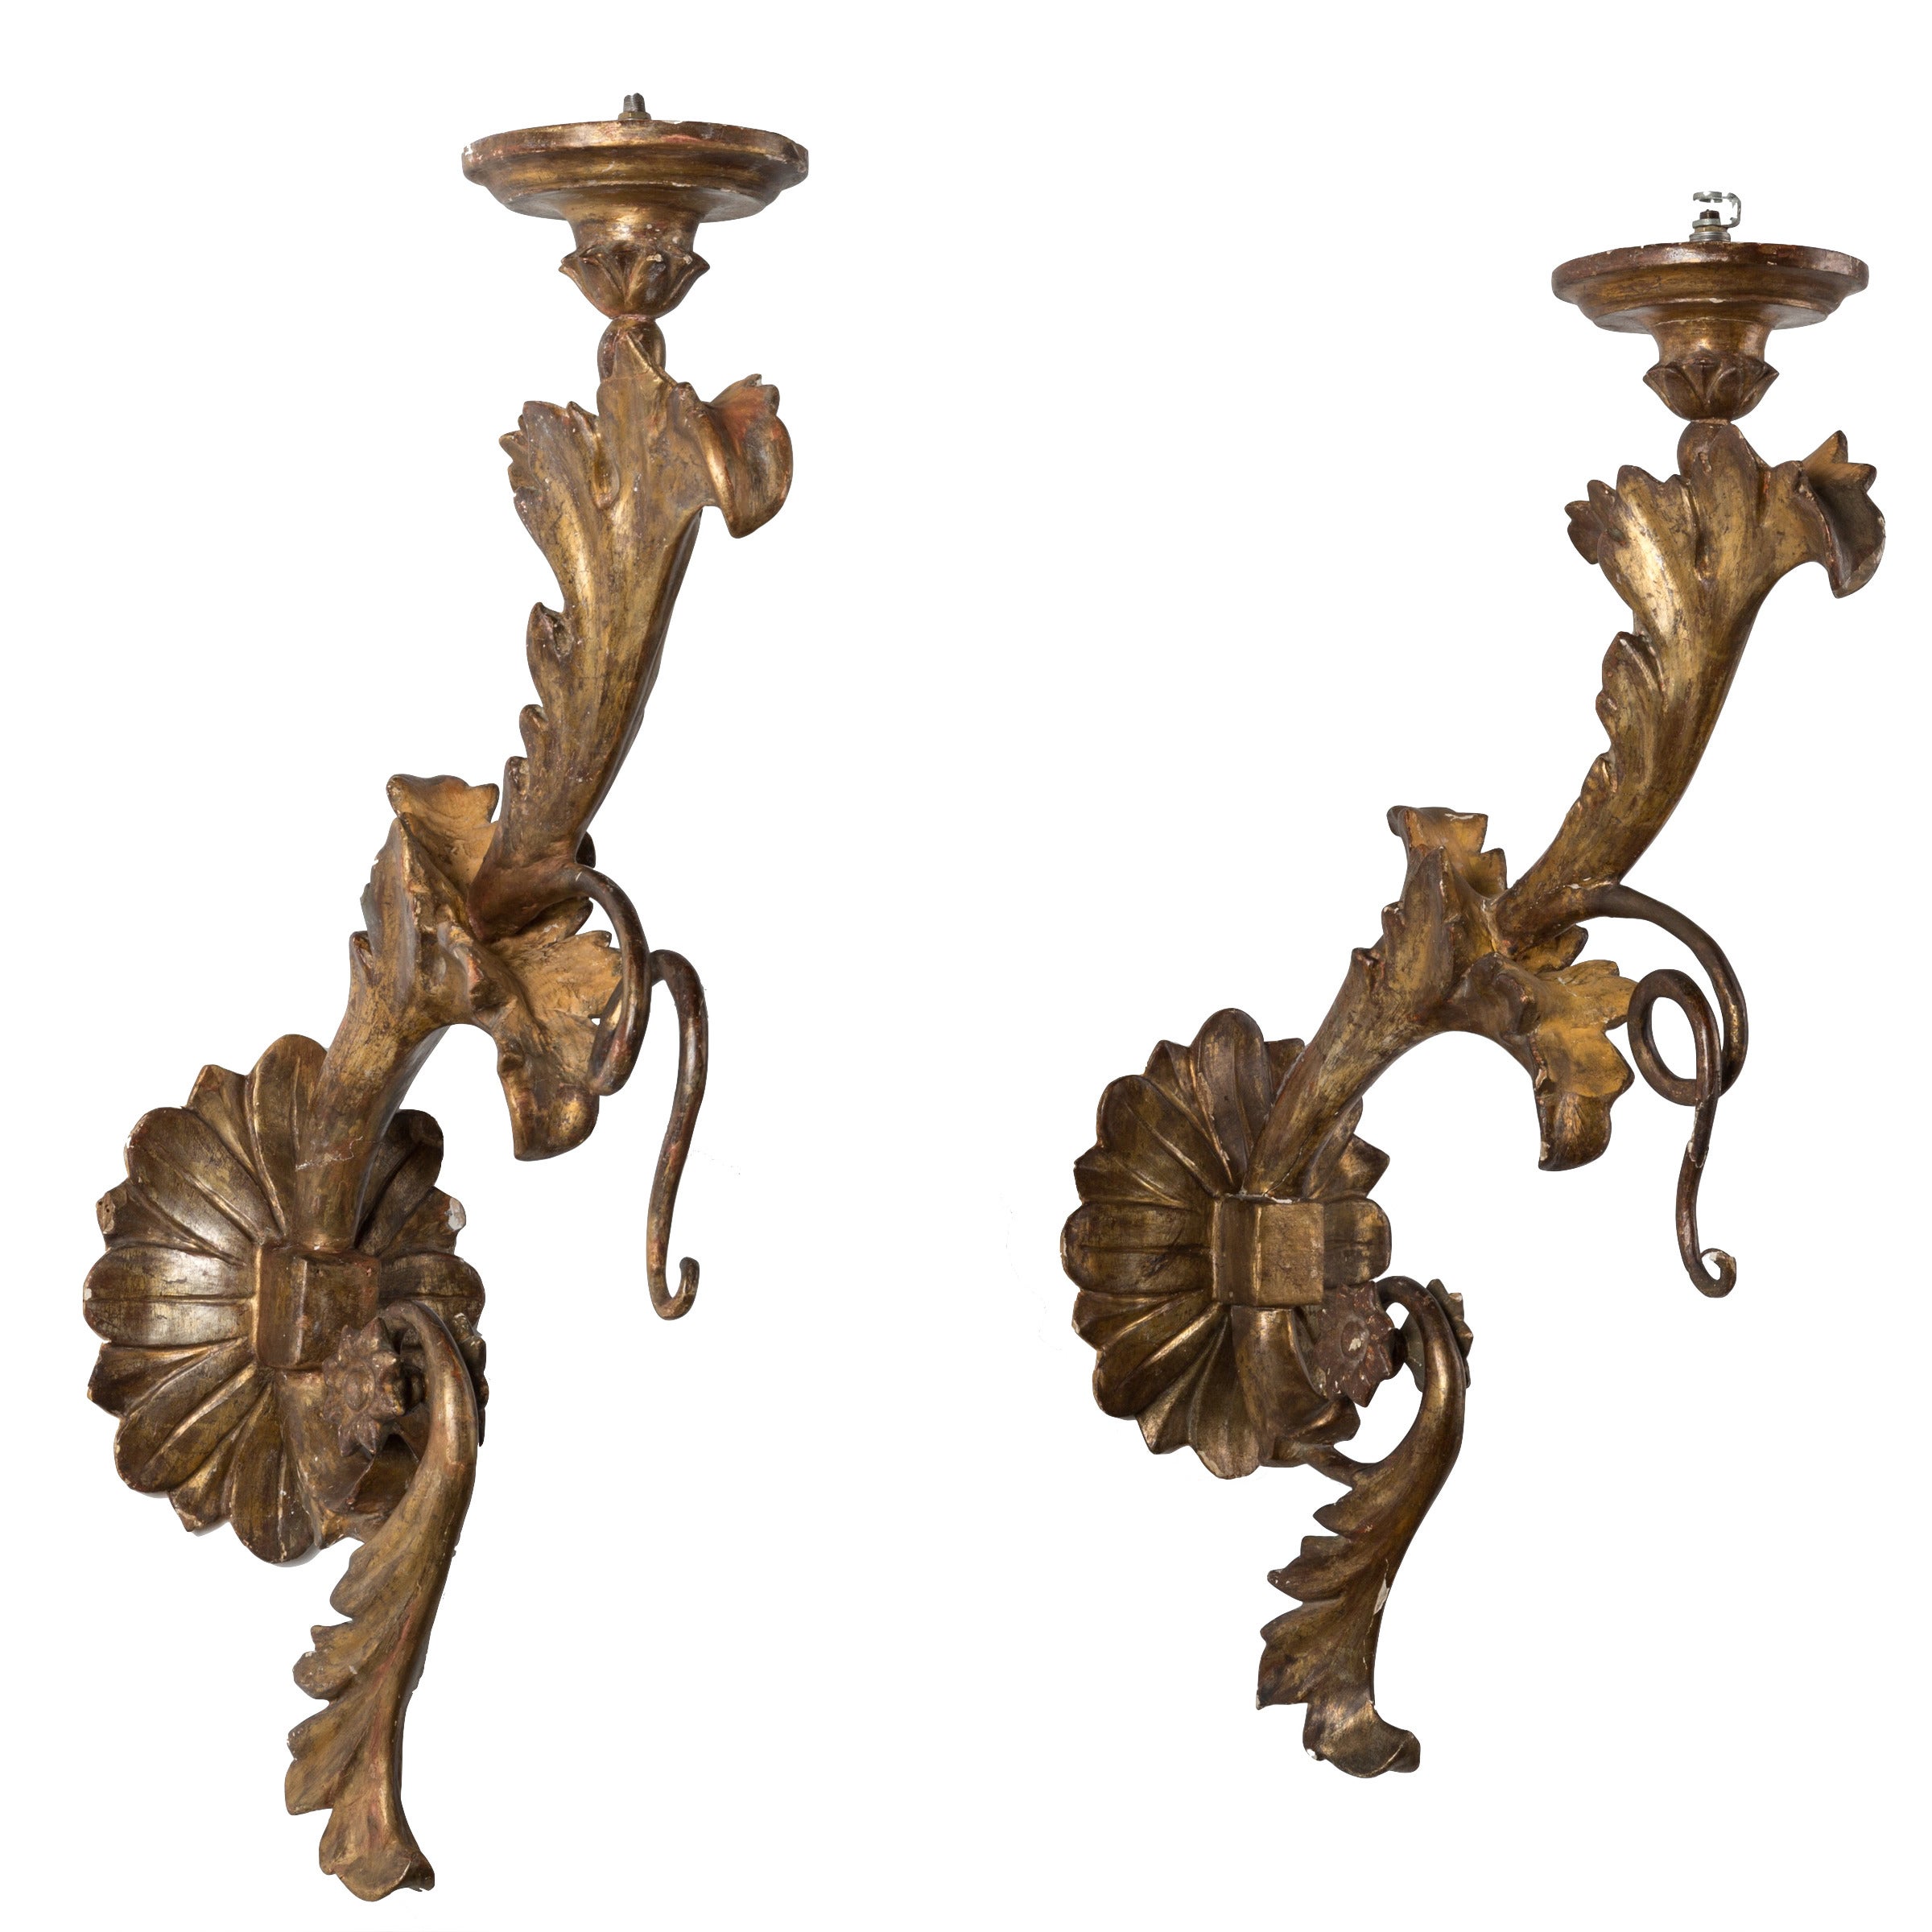 Pair of 18c Italian Louis XIV Wooden Arm Sconces with Water Gilding